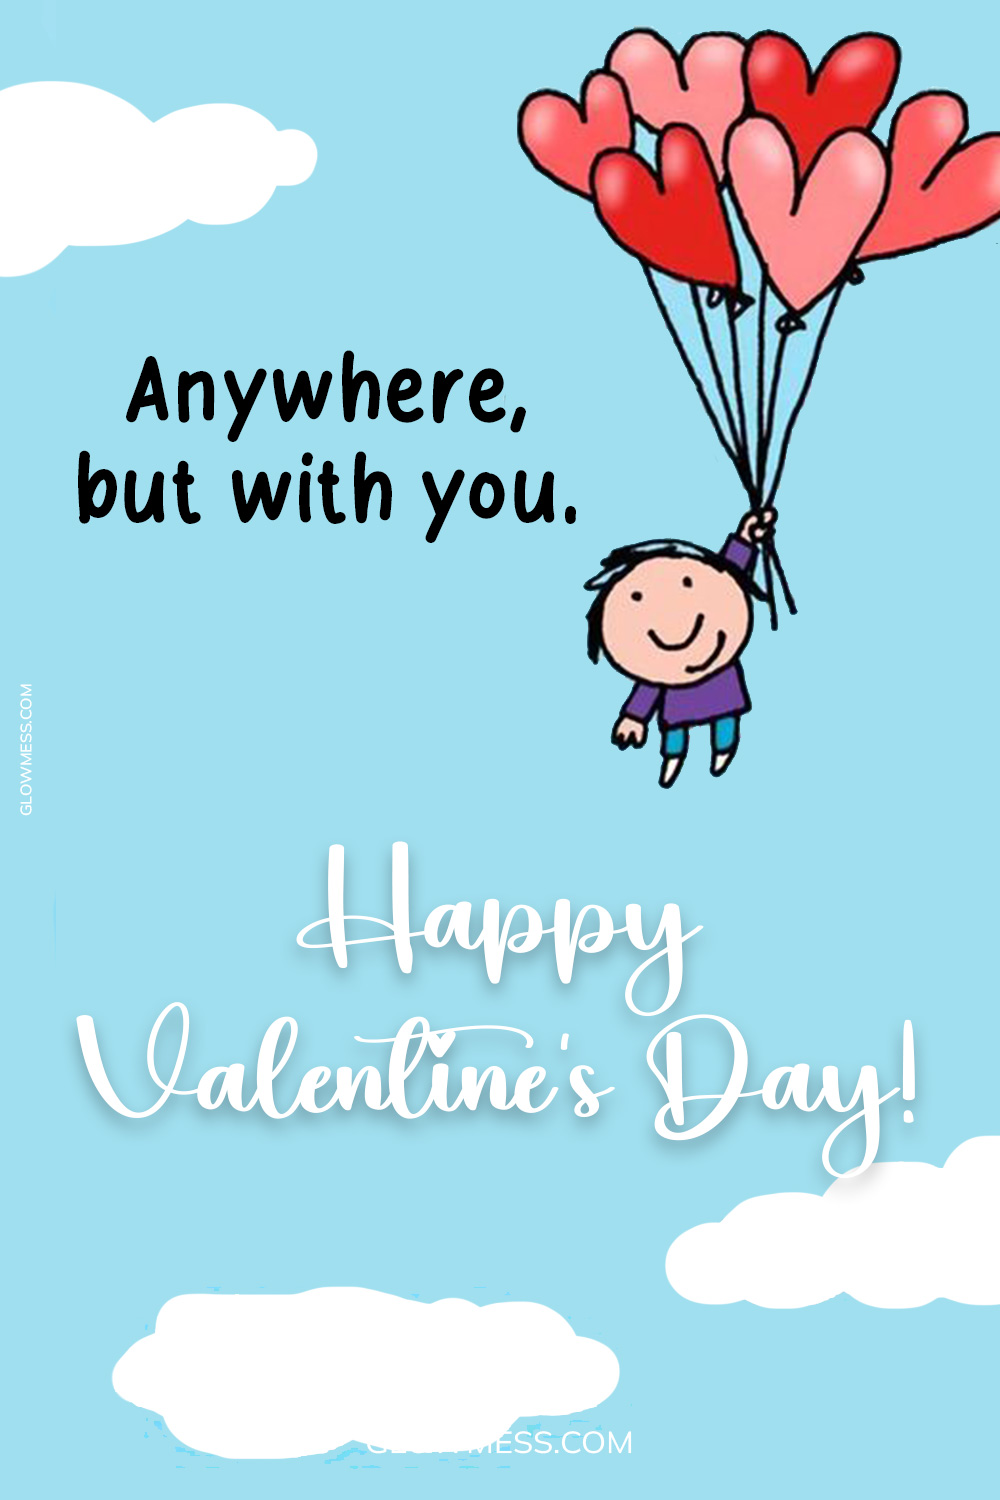 Happy Valentine's Day! Quotes, Messages and Images for her/him